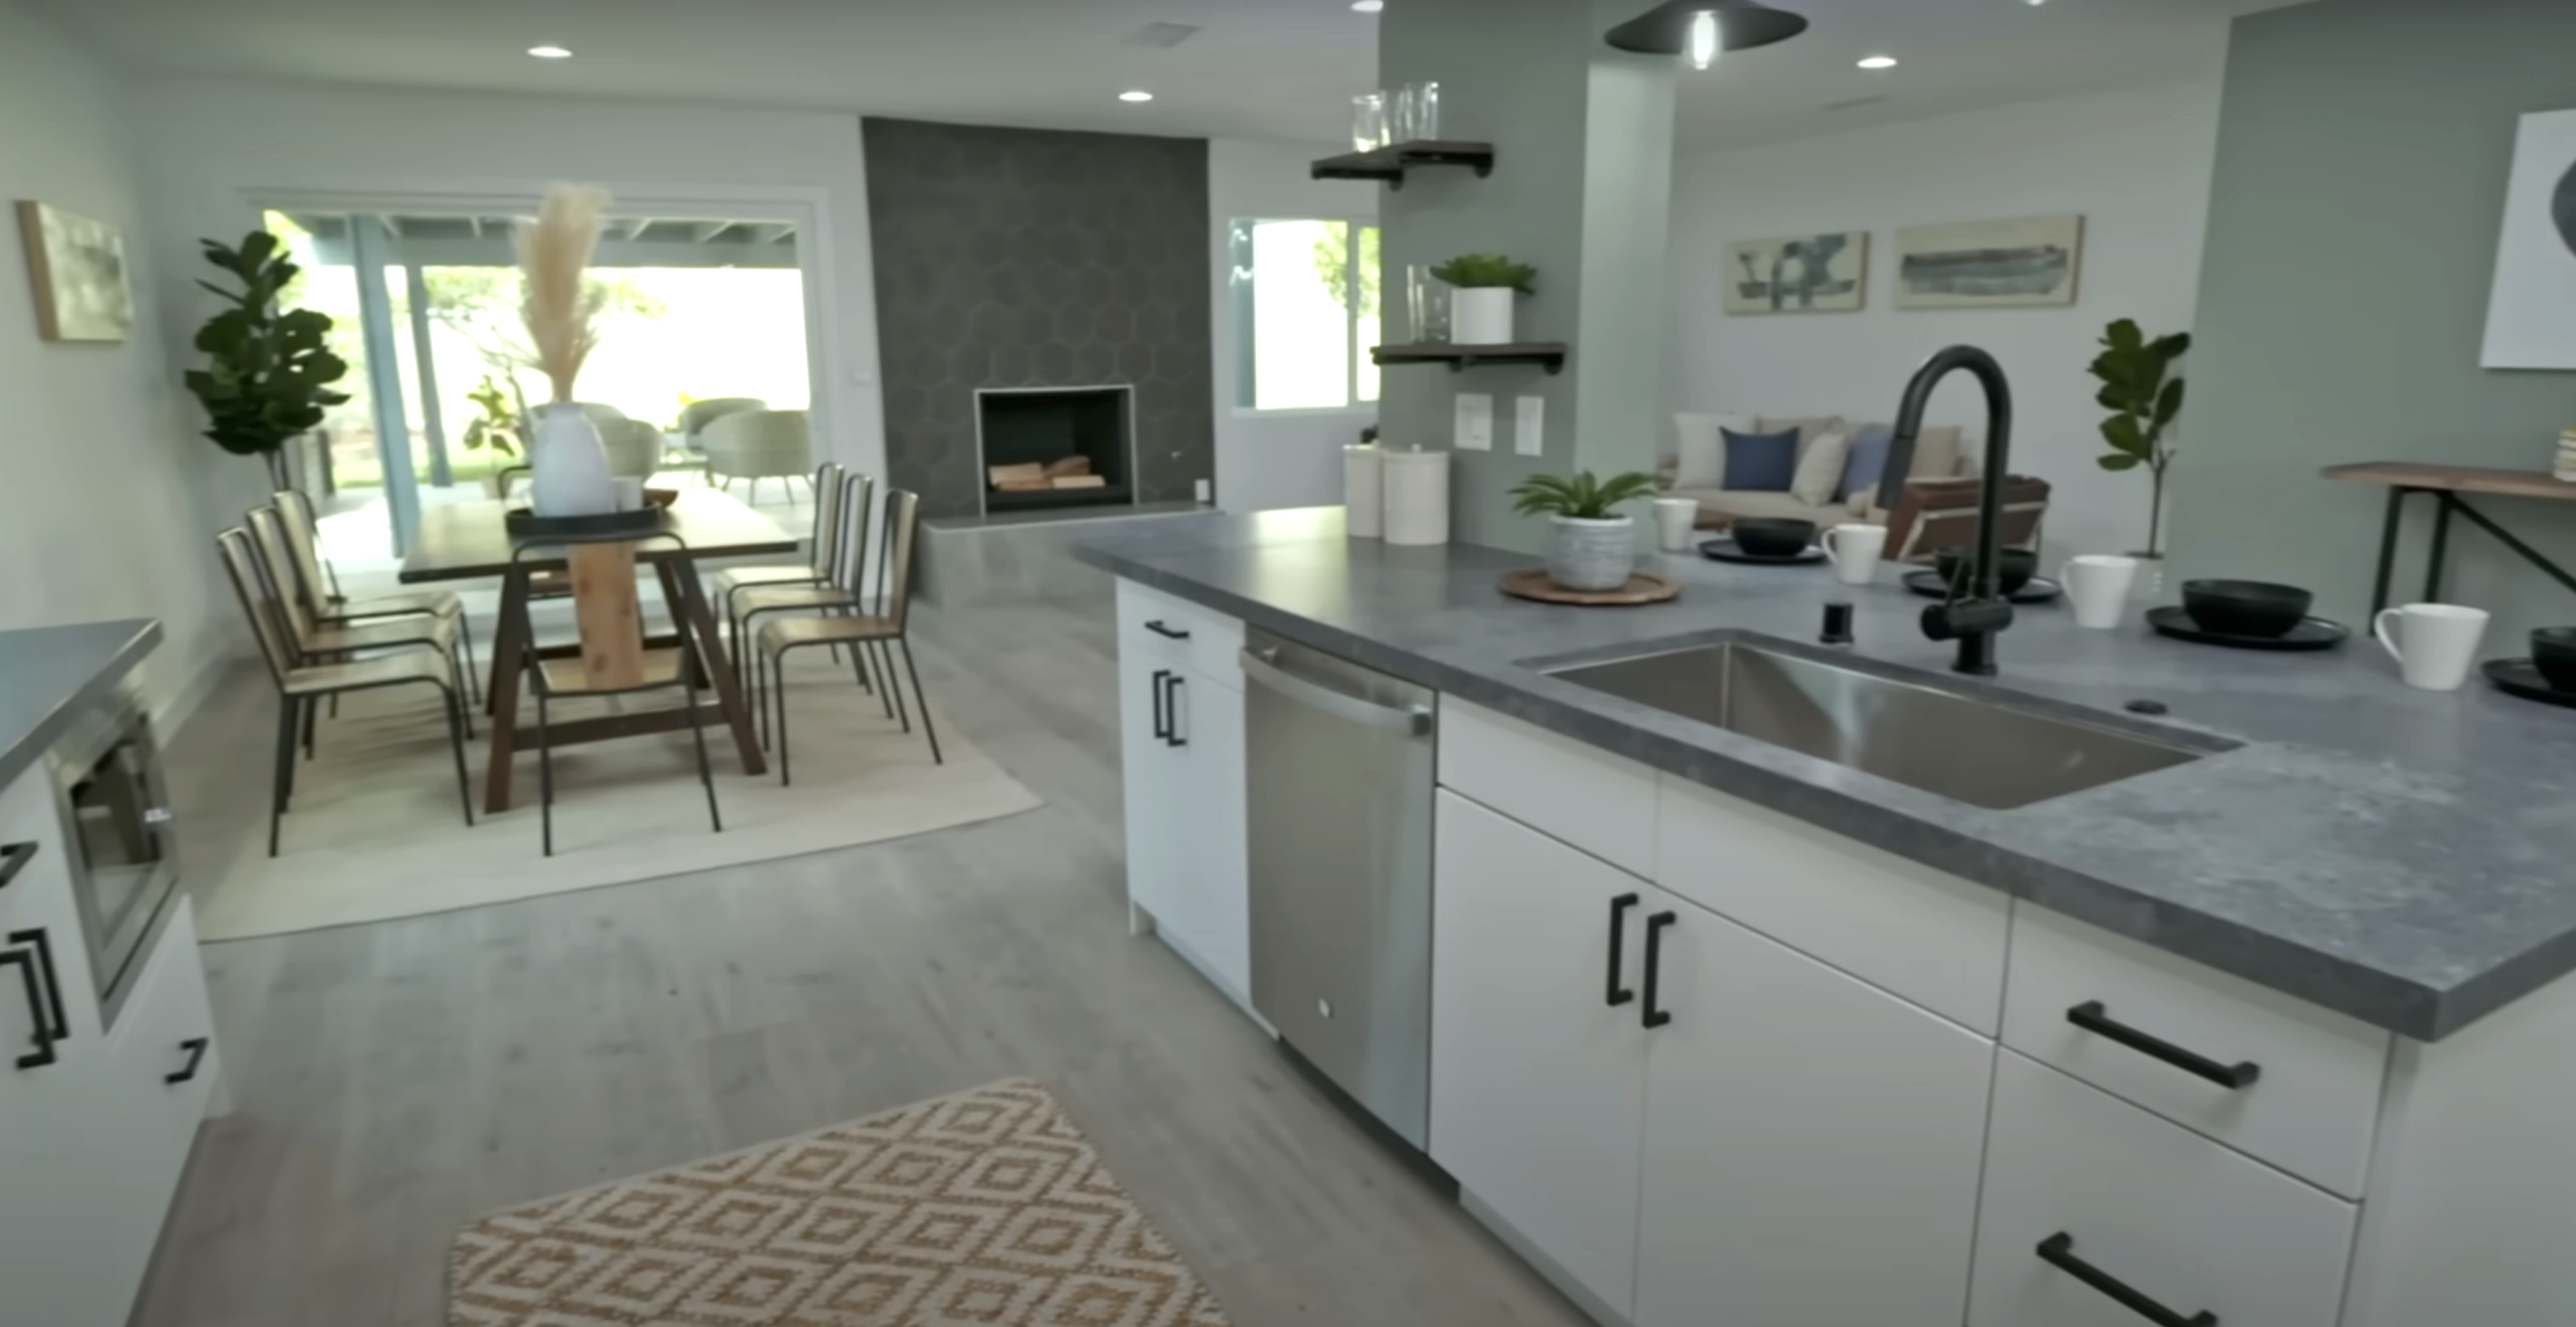 A kitchen and living room designed by Tarek and Christina, including white cabinets with black hardware and grey countertops